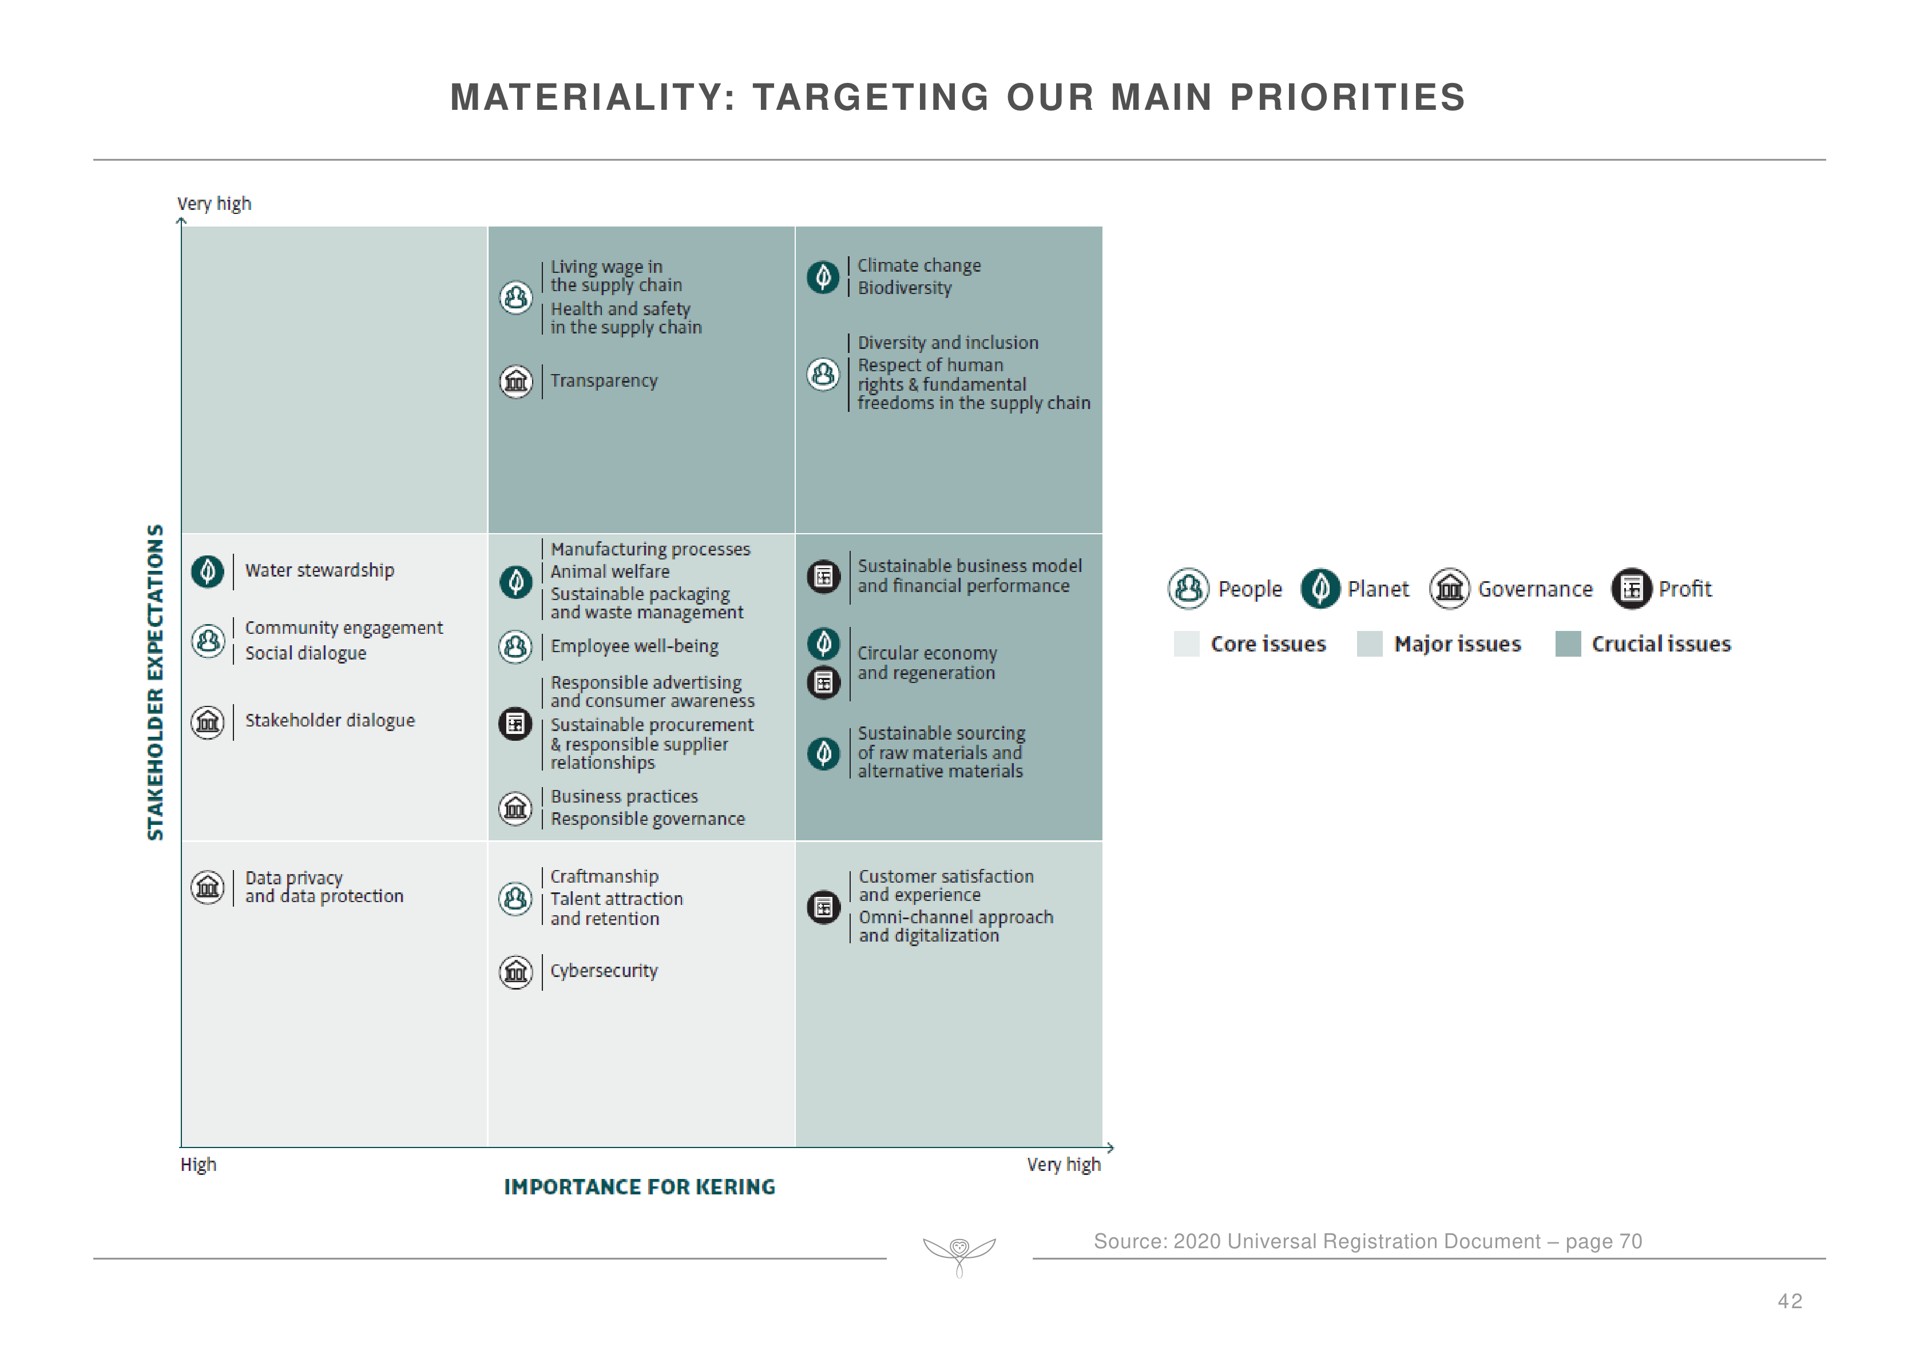 materiality targeting our main priorities | Kering